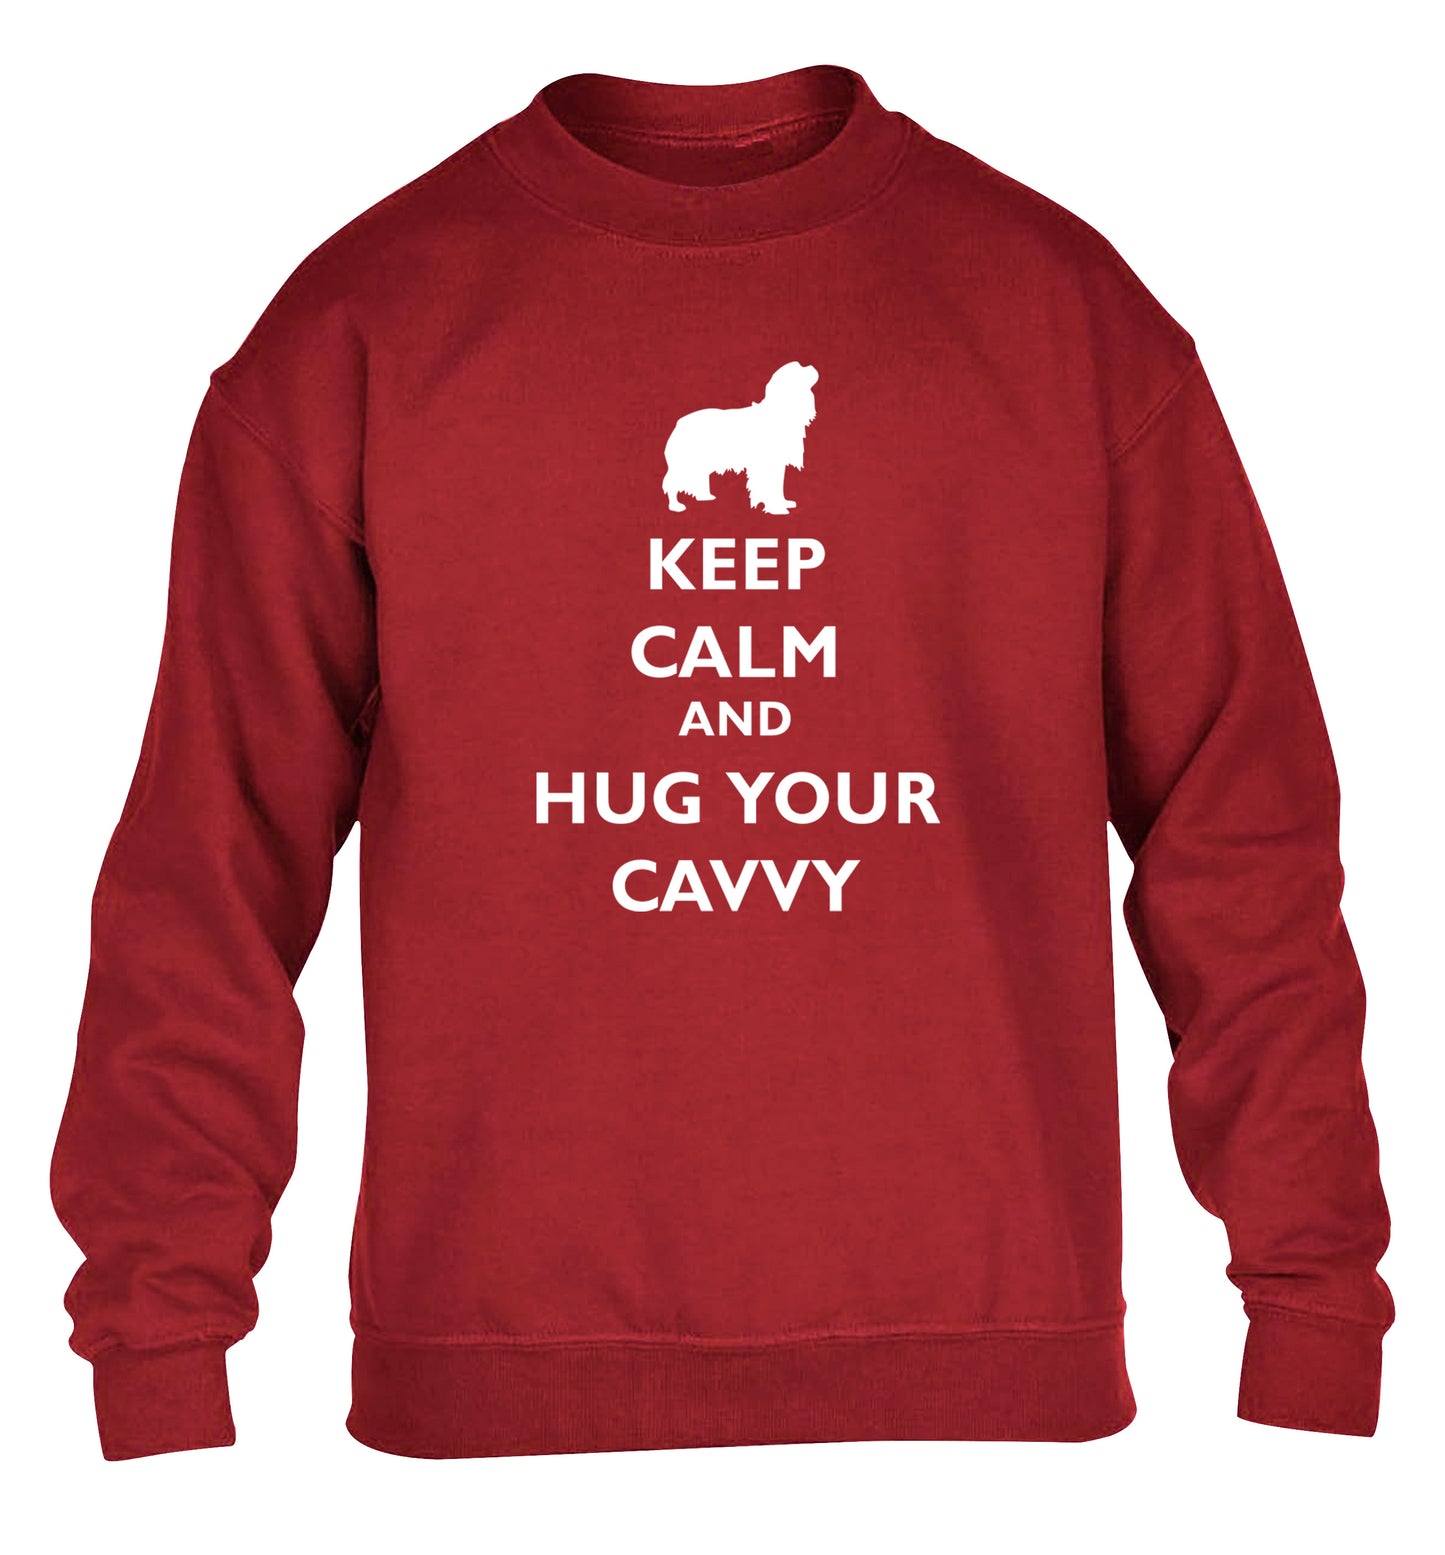 Keep calm and hug your cavvy children's grey sweater 12-13 Years